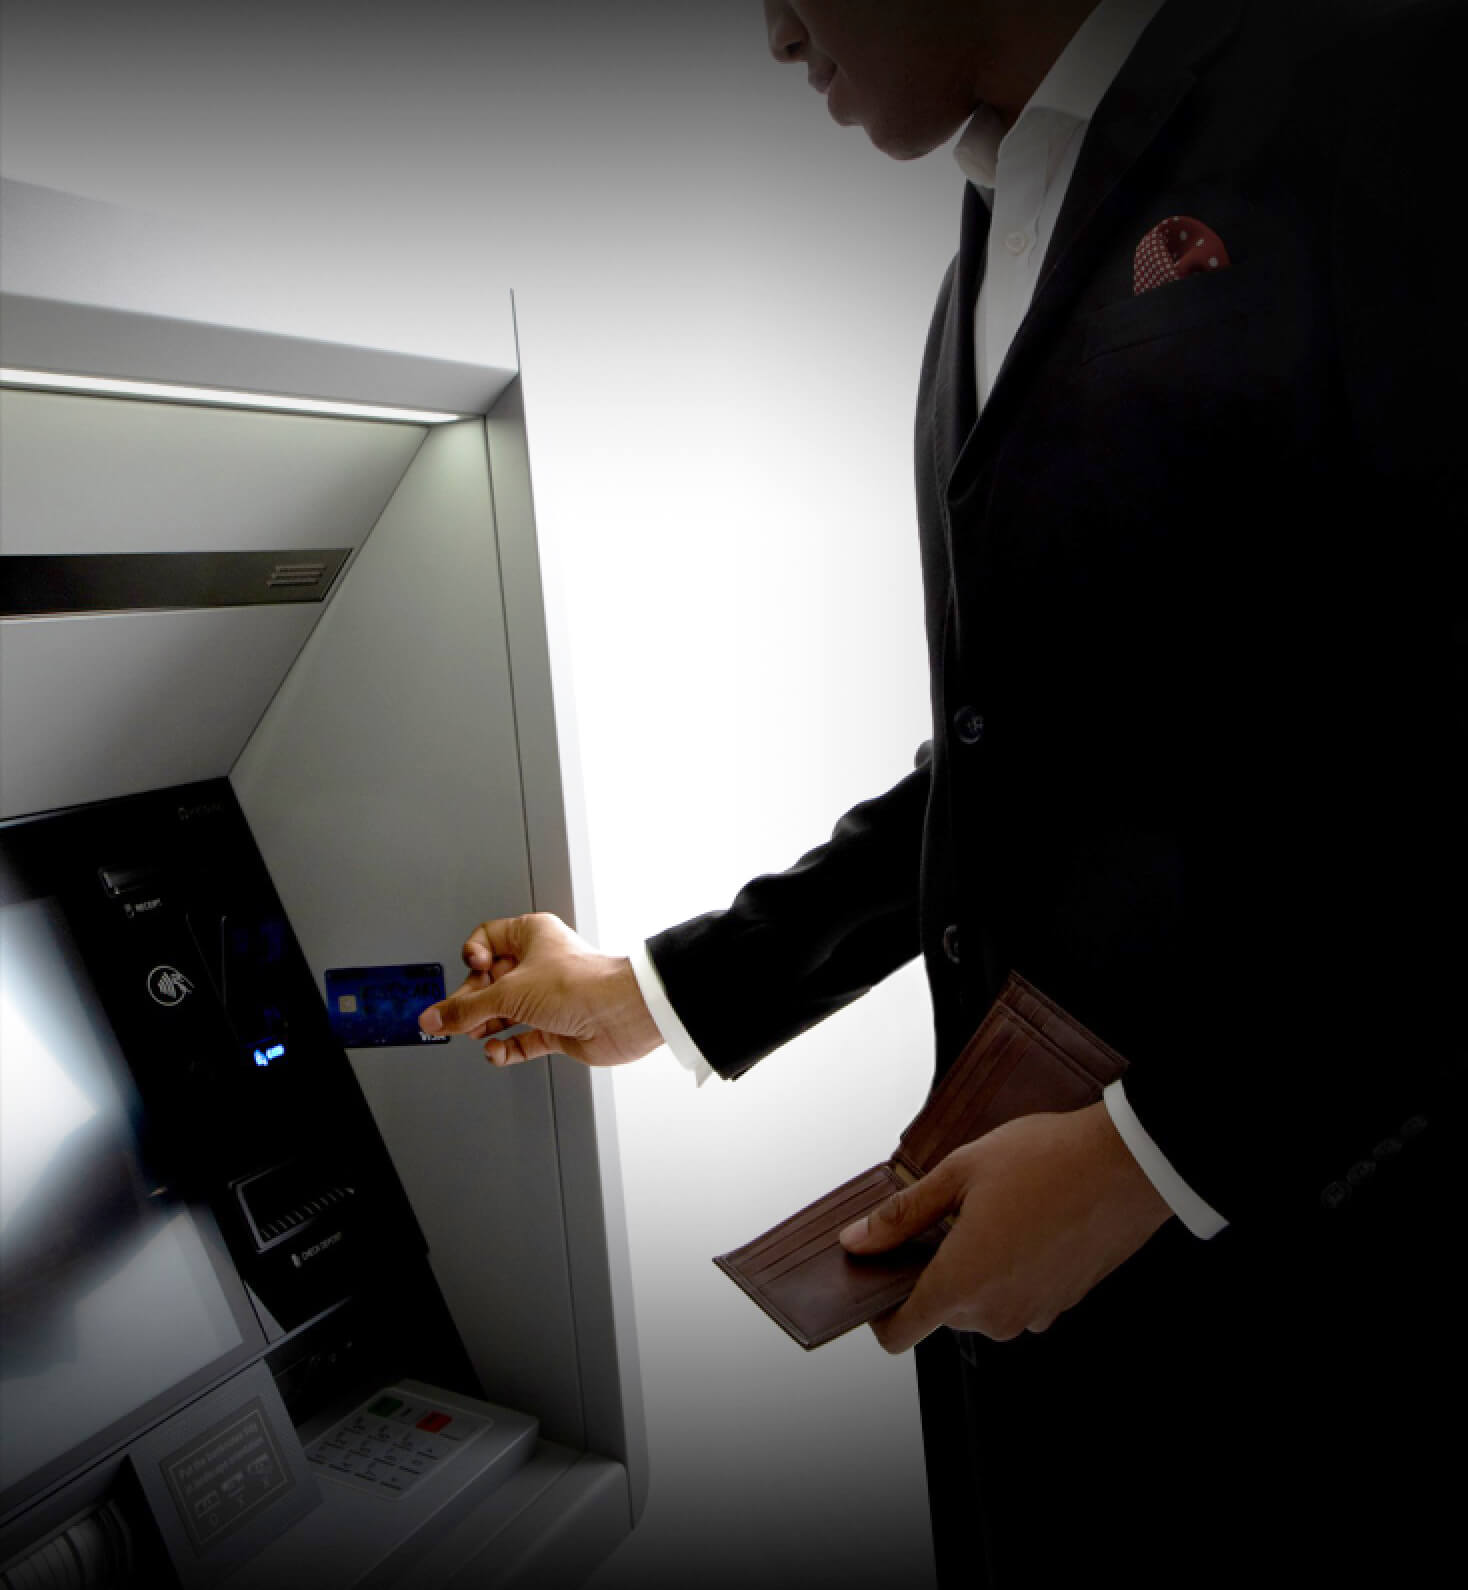 Man wearing suite using card at ATM